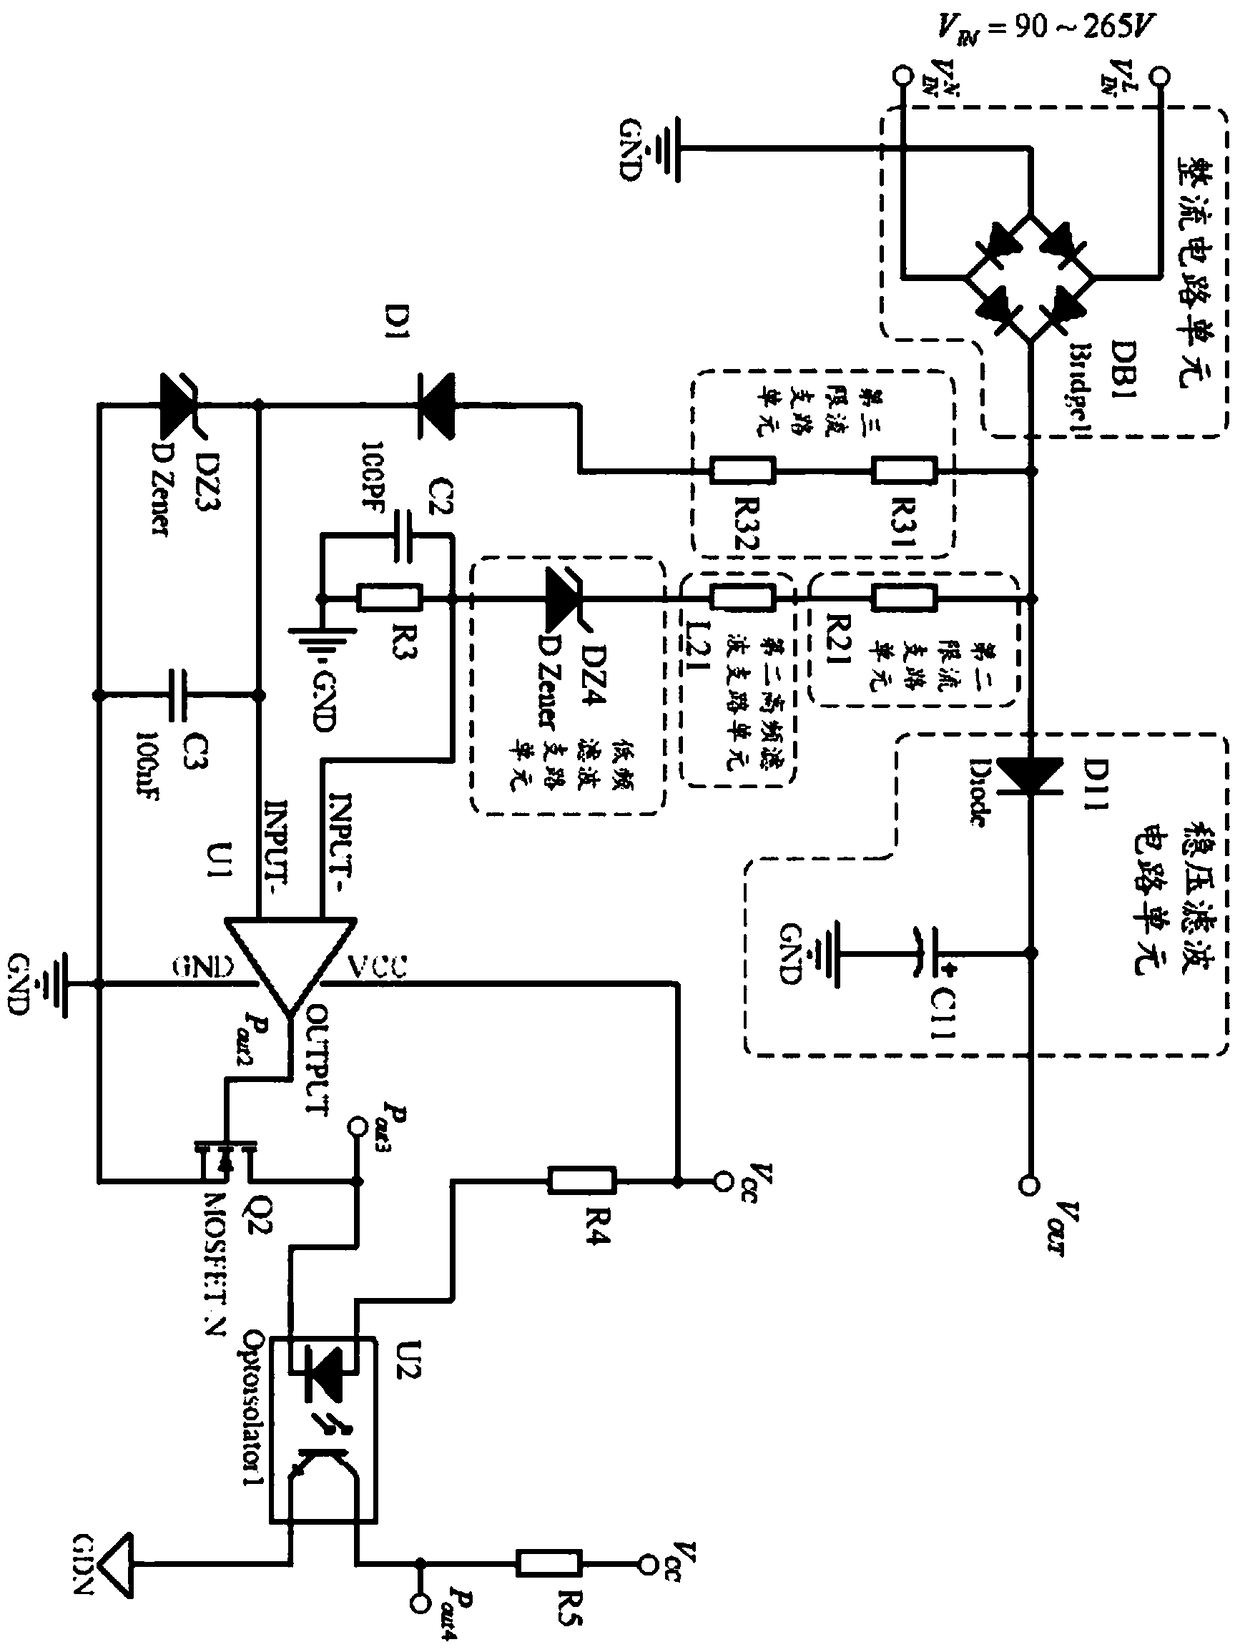 A circuit for generating a clock pulse signal based on alternating current